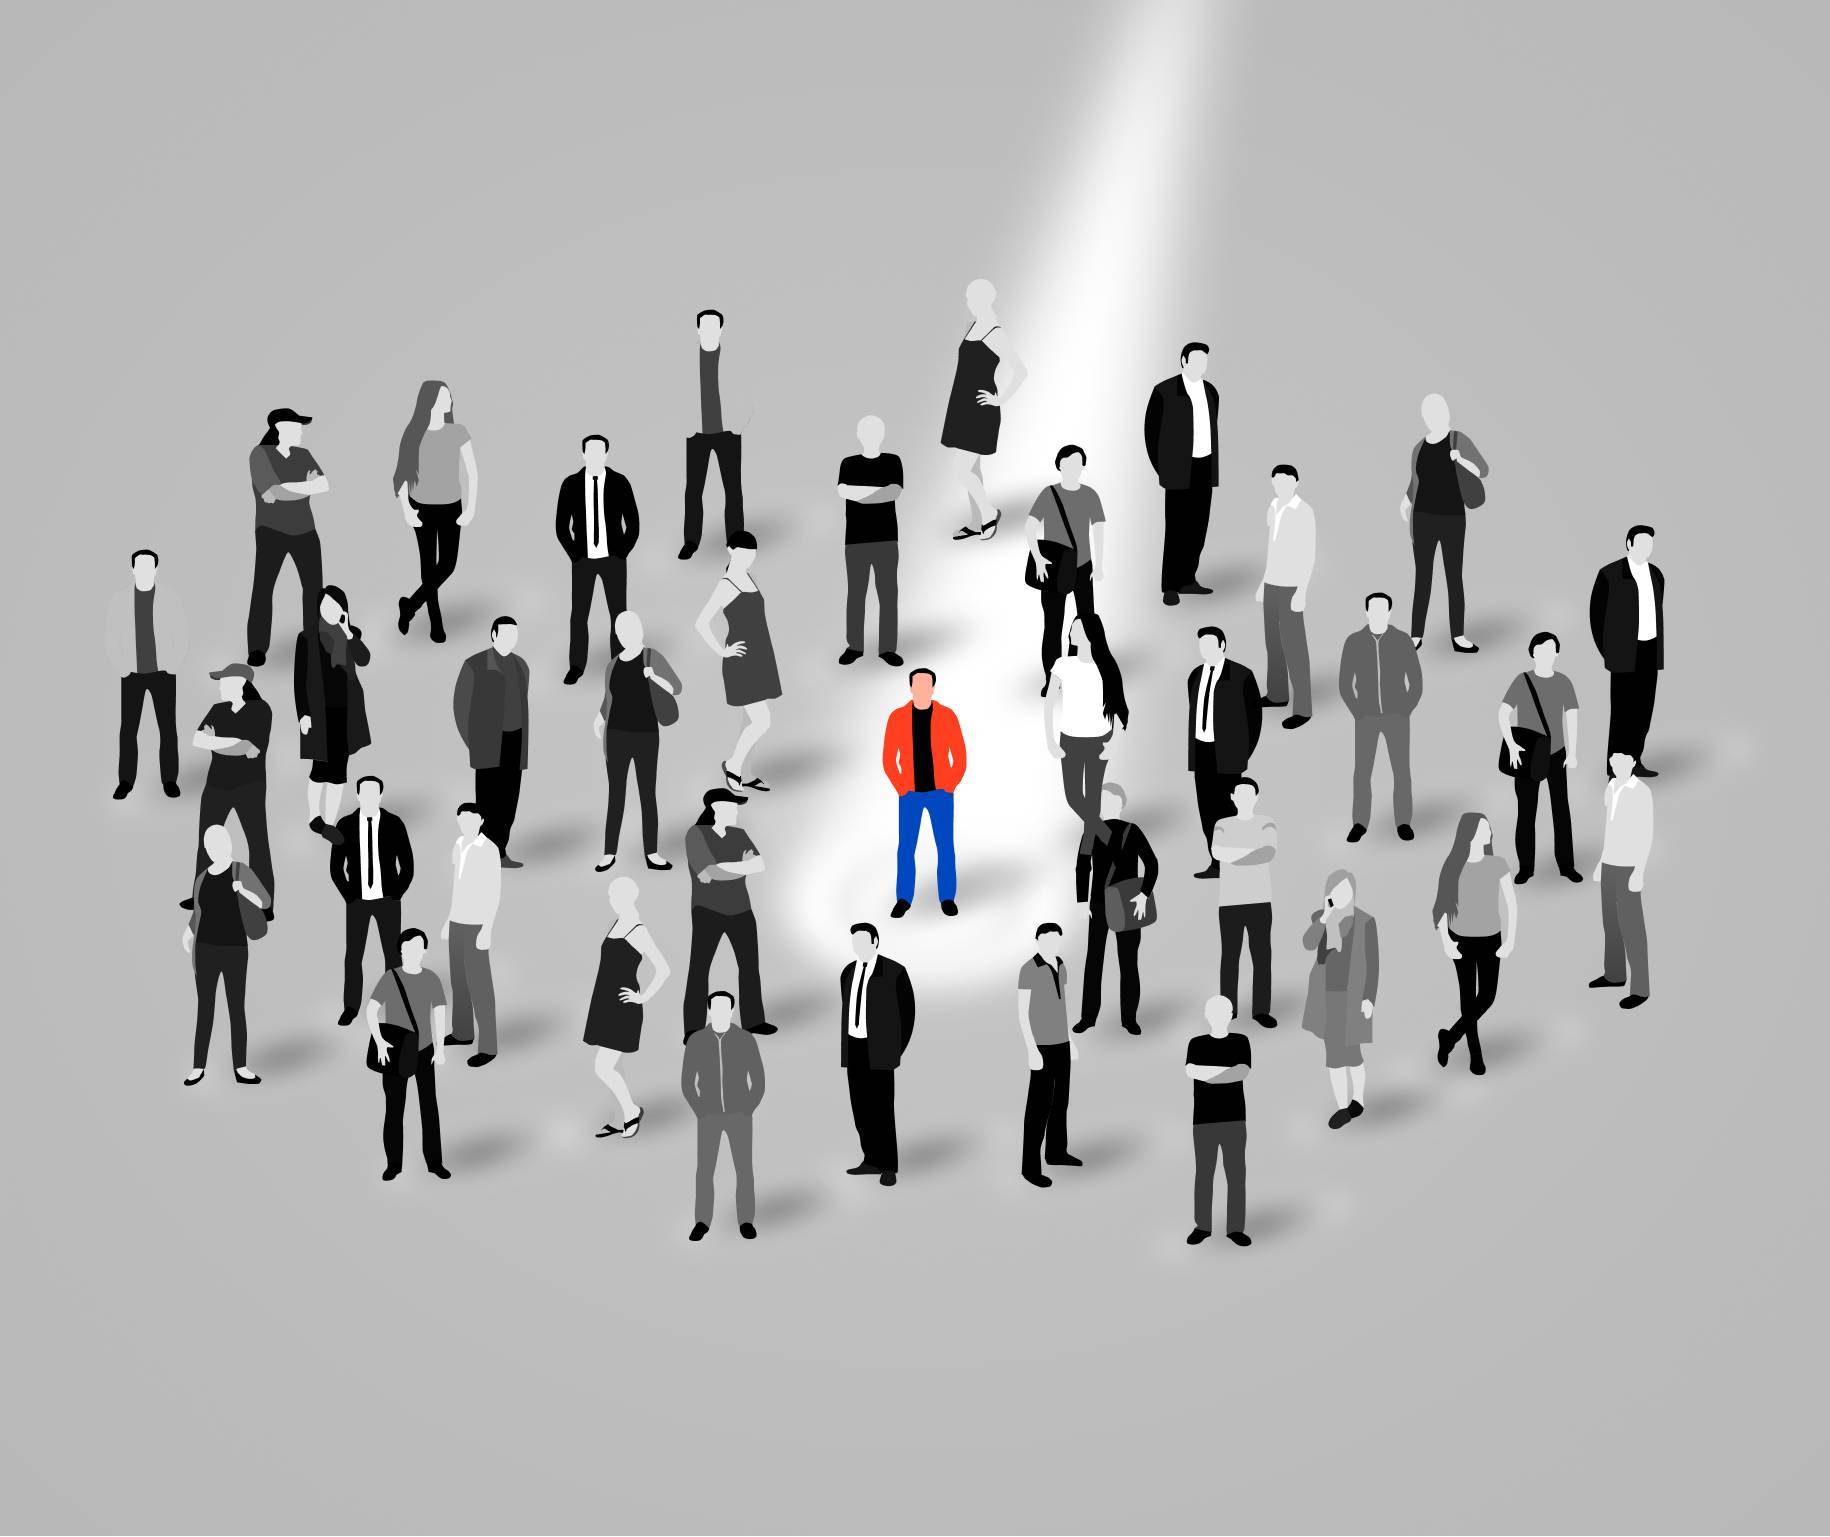 an illustration of business targets standing out from a crowd of business competitors